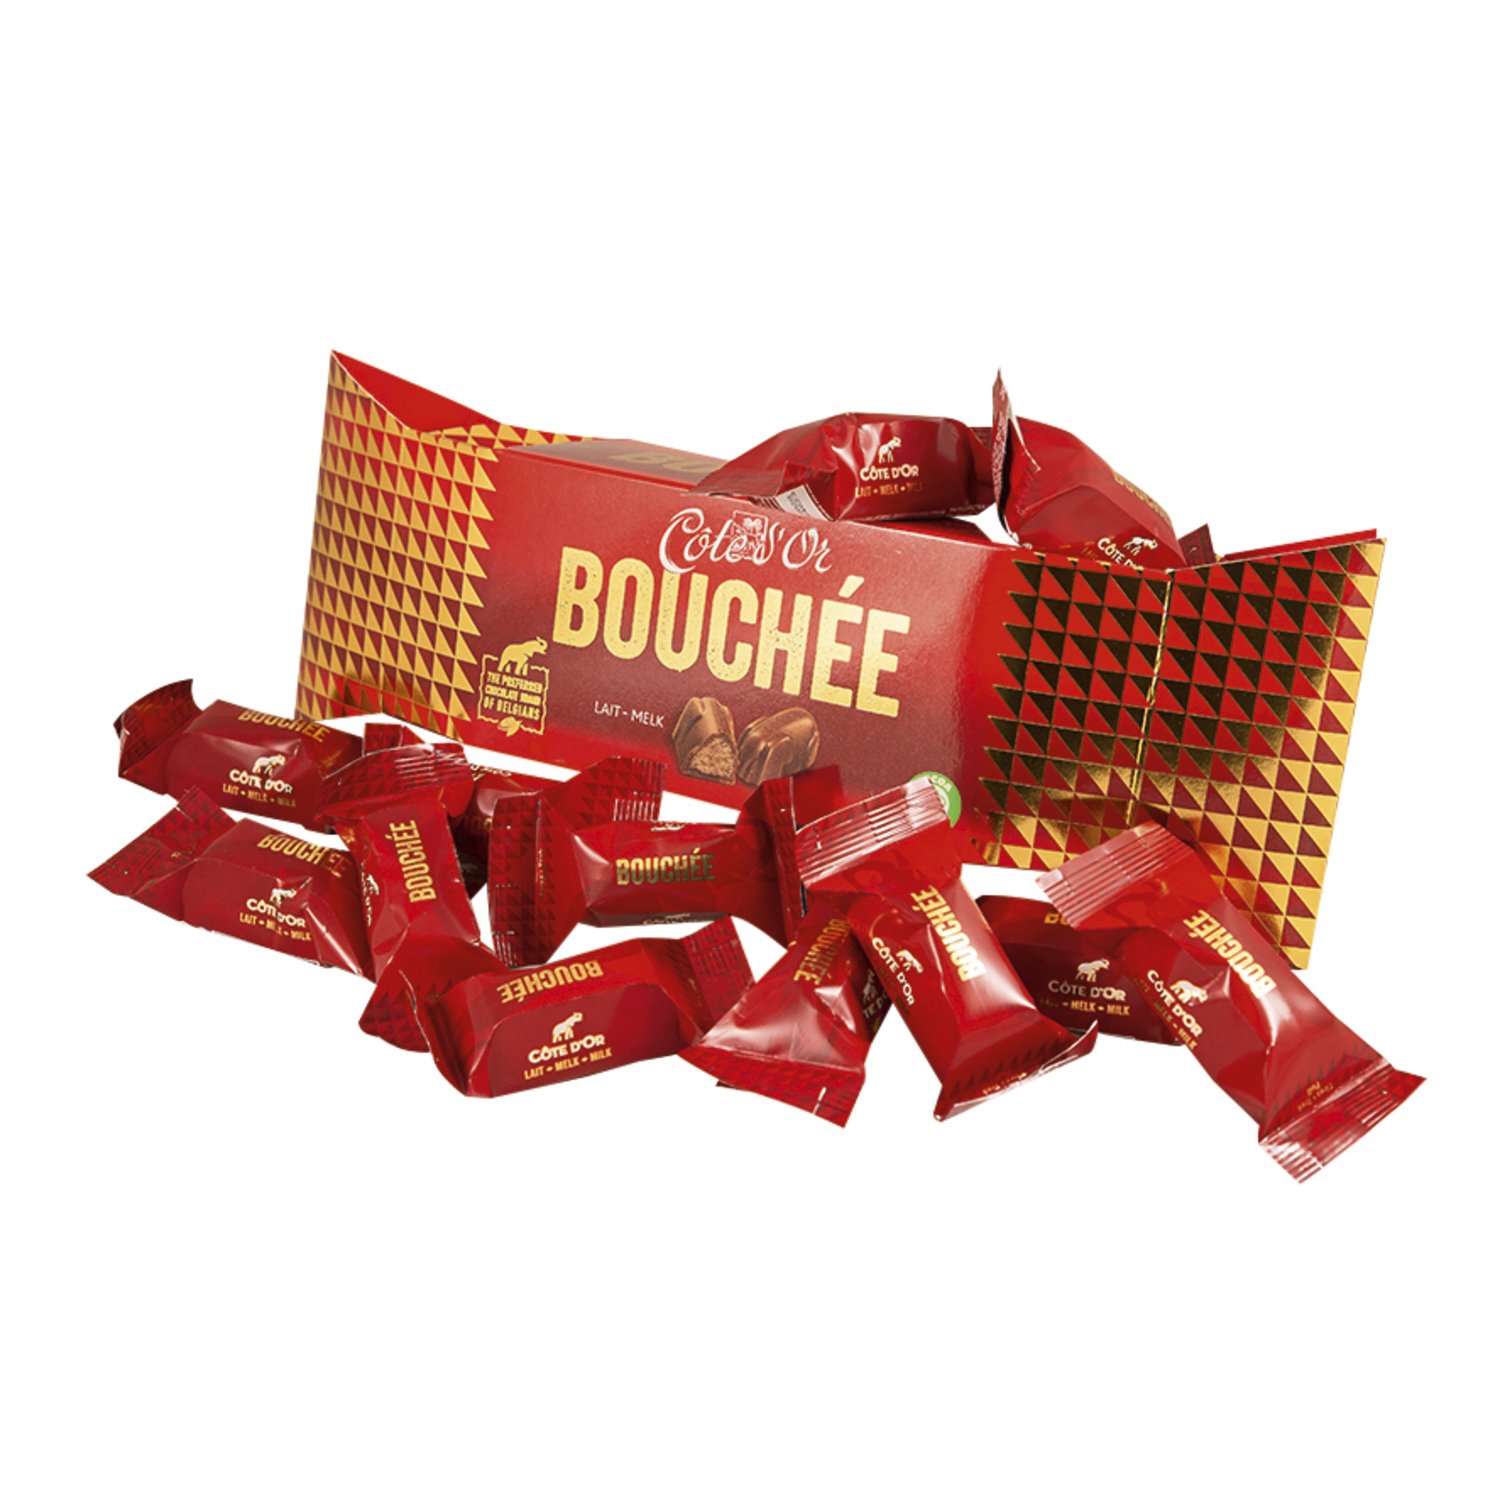 Cote d'Or Bouchee gift cracker filled with individual Bouchees - 15x300g